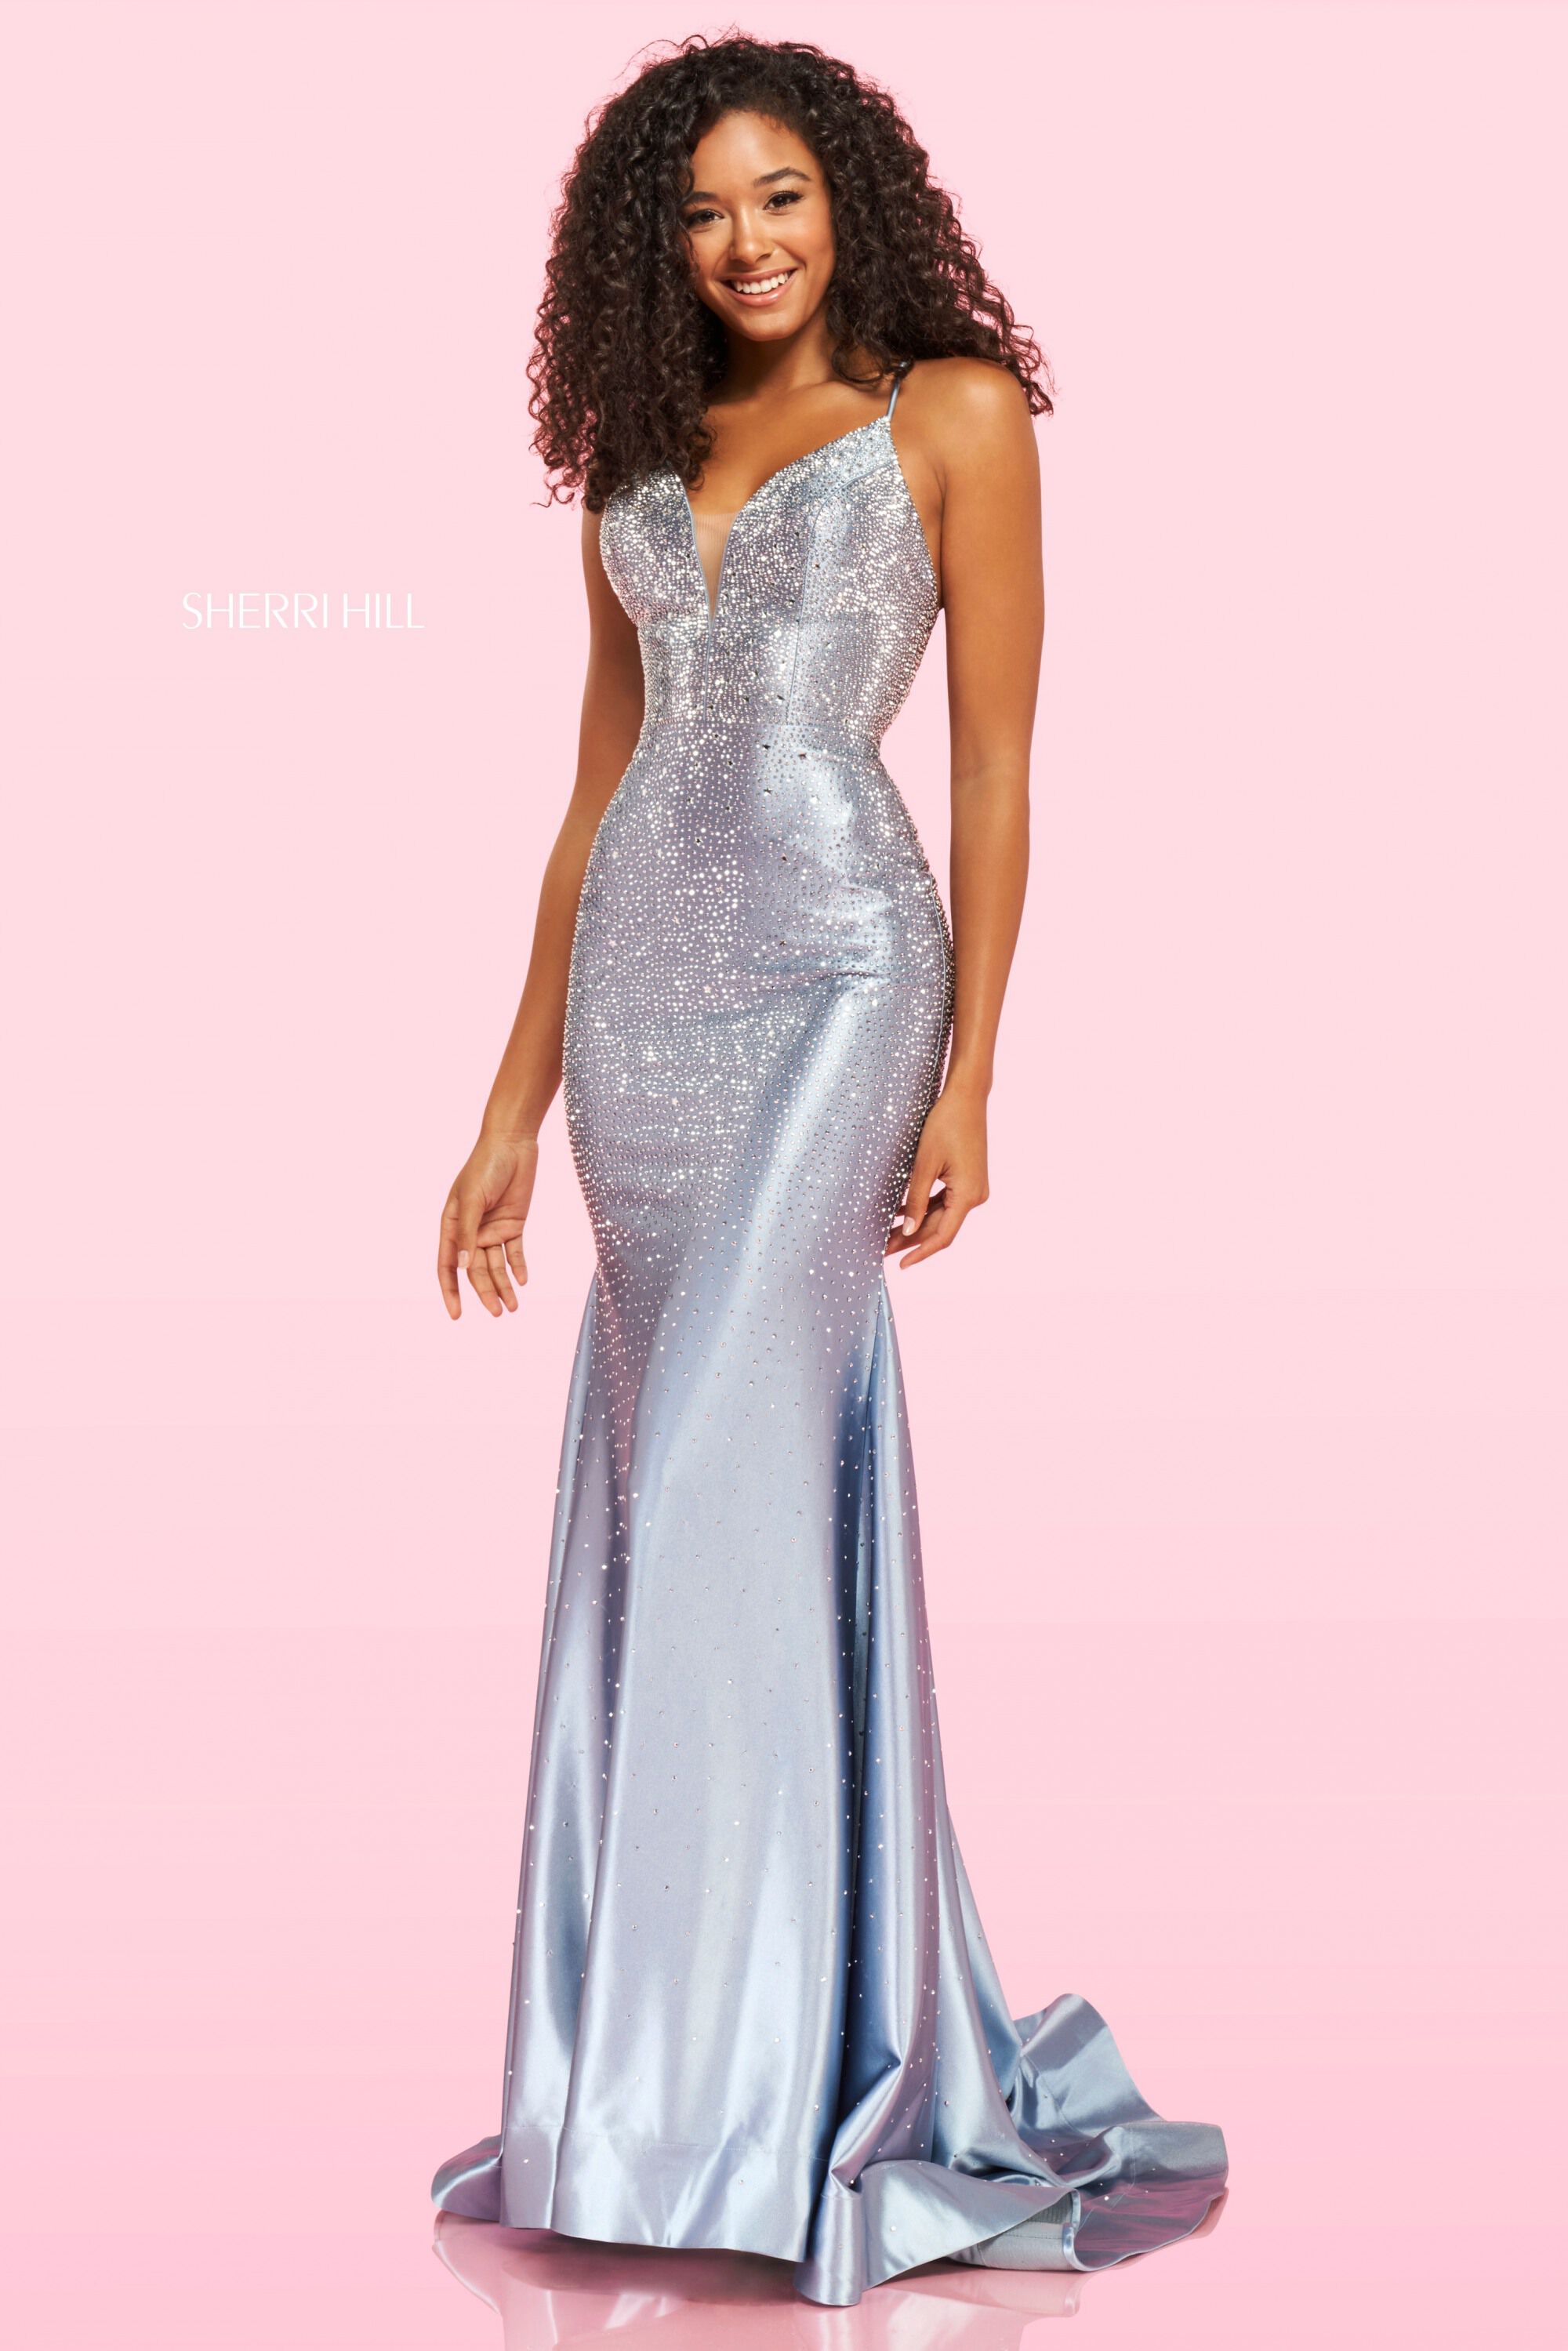 style № 54273 designed by SherriHill